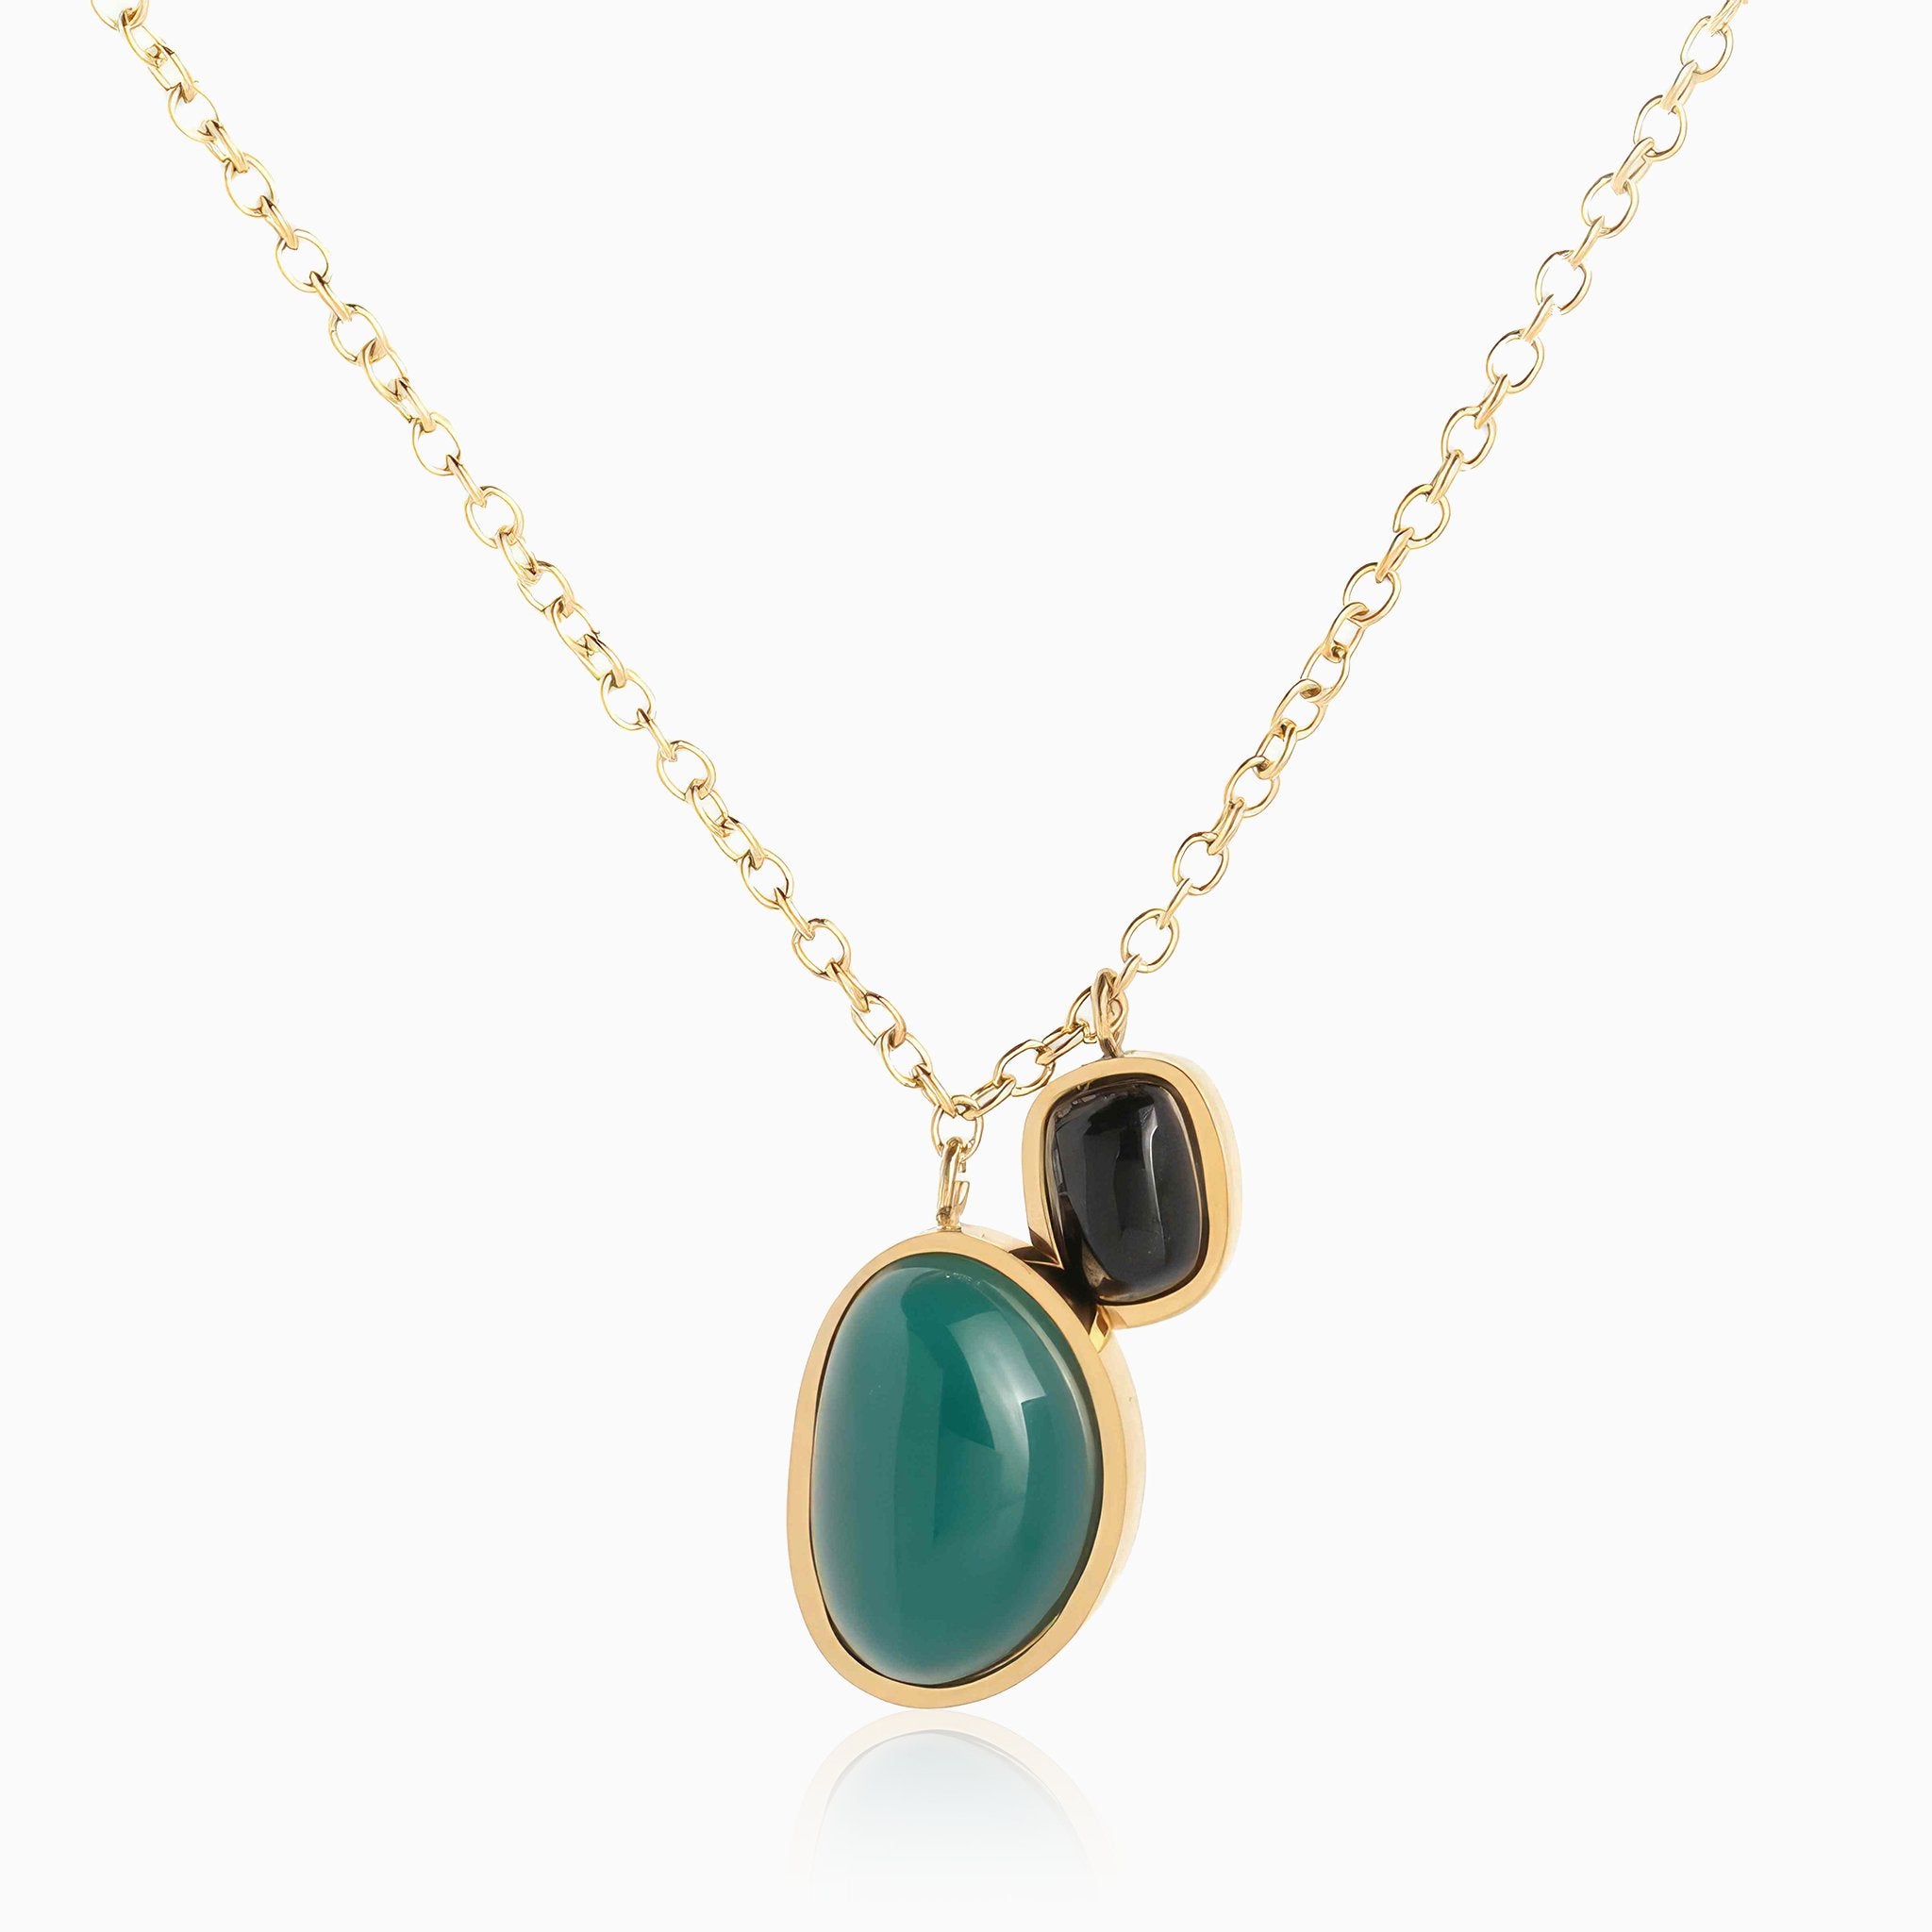 Simple Inlaid Green Black Agate Stone Design Set - Nobbier - Jewelry Set - 18K Gold And Titanium PVD Coated Jewelry